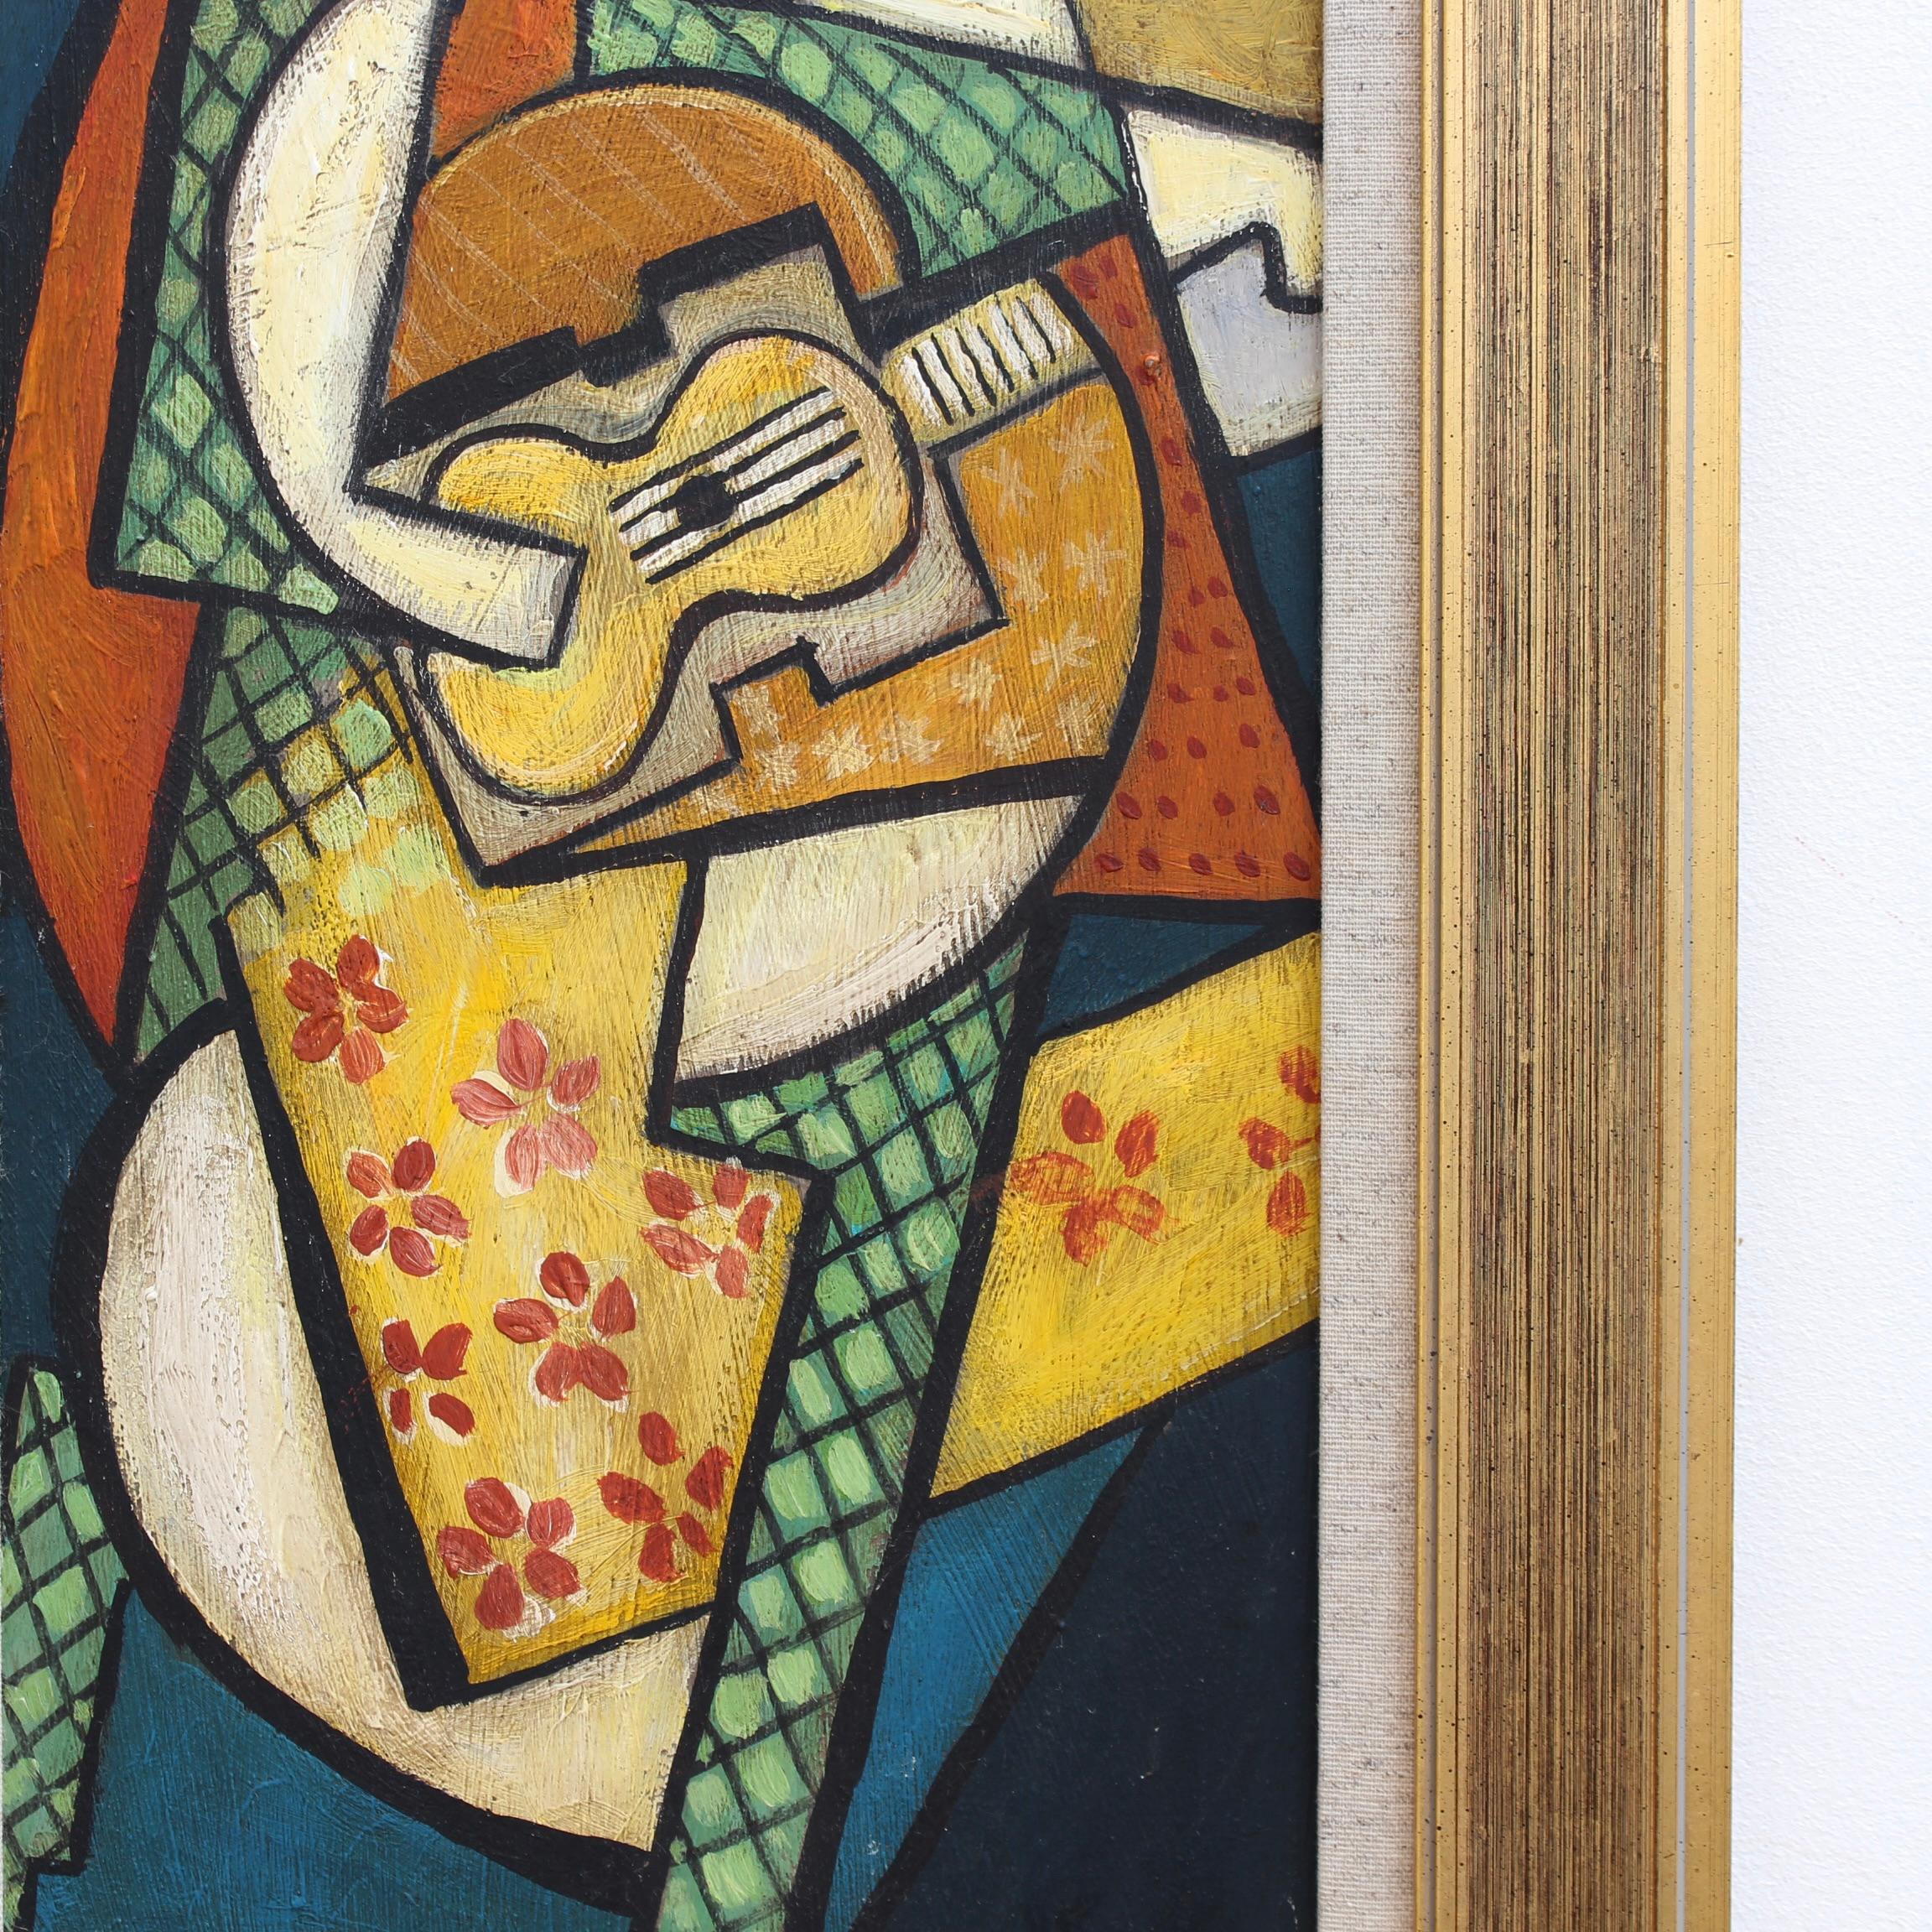 'Portrait of a Man Playing Guitar', Berlin School (circa 1960s) For Sale 6